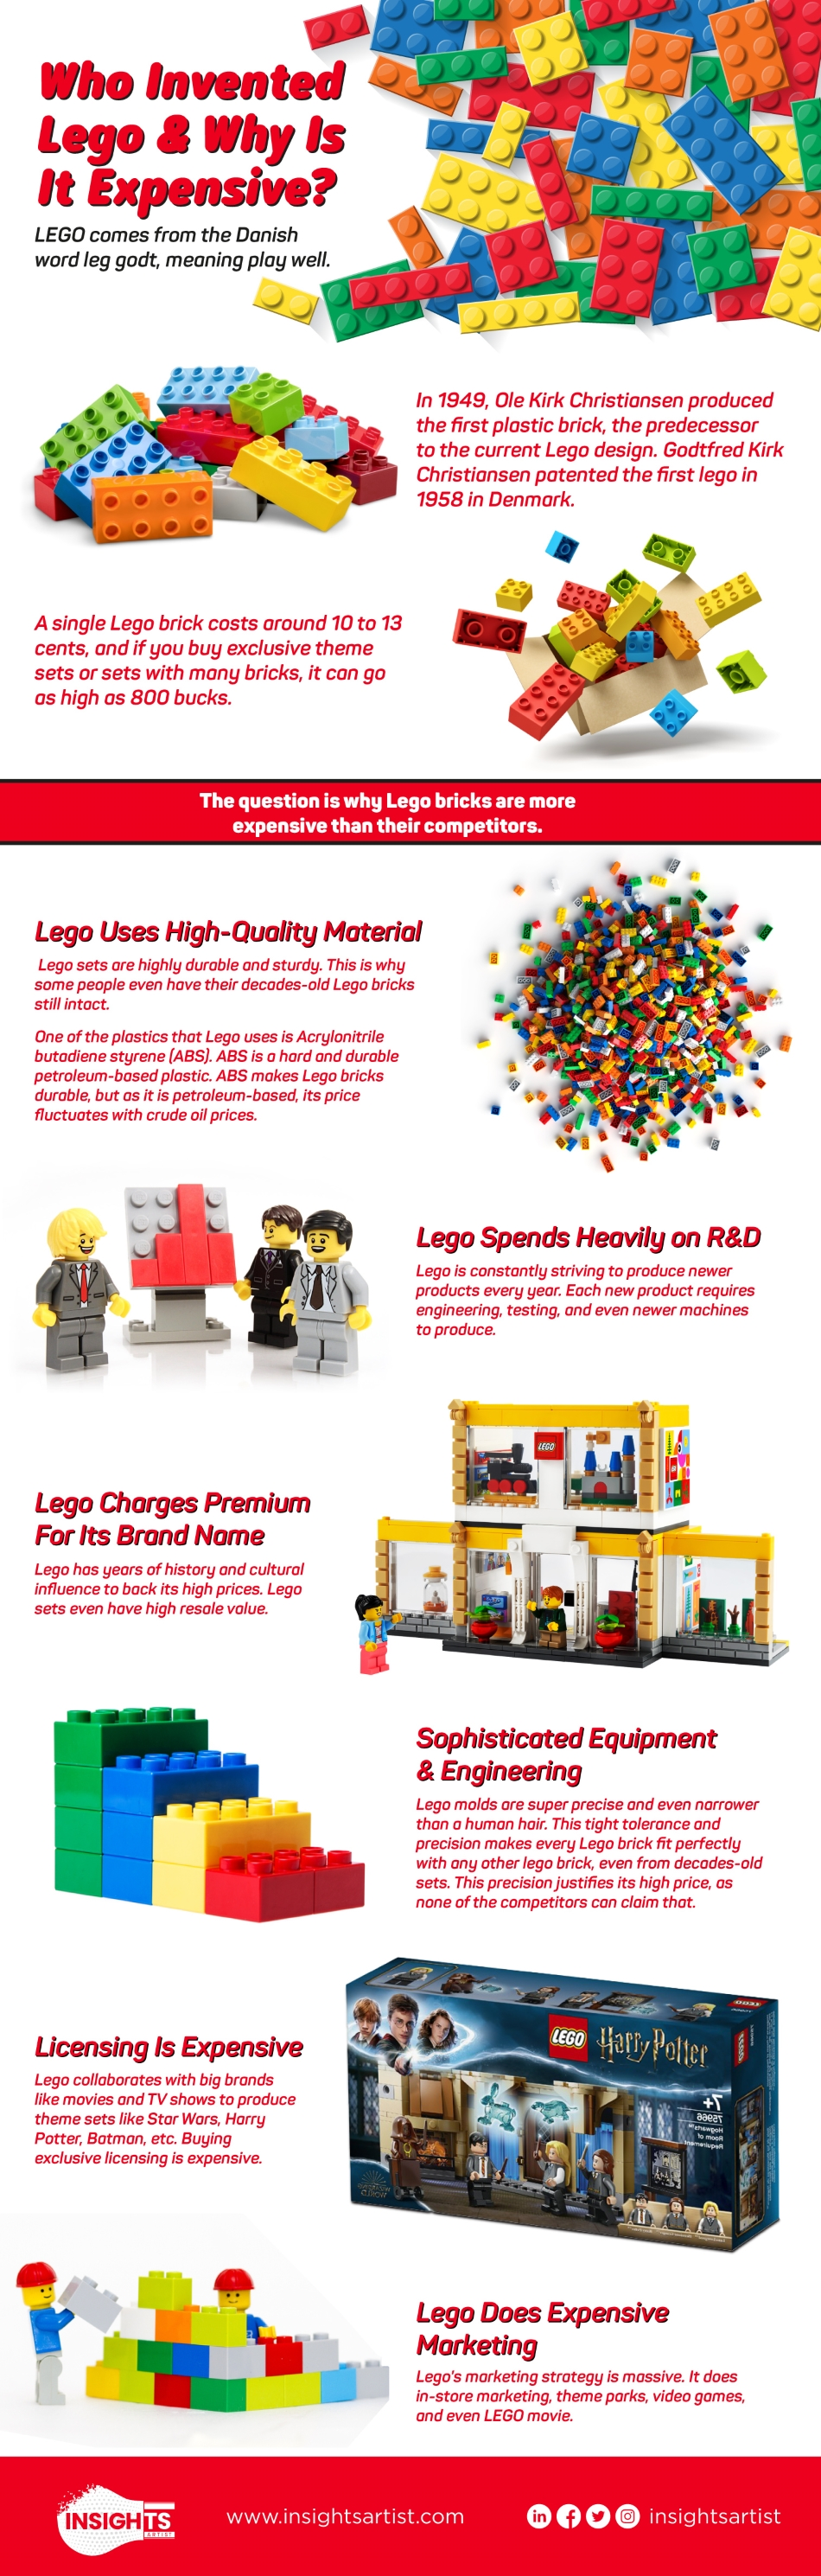 Who Invented Lego?